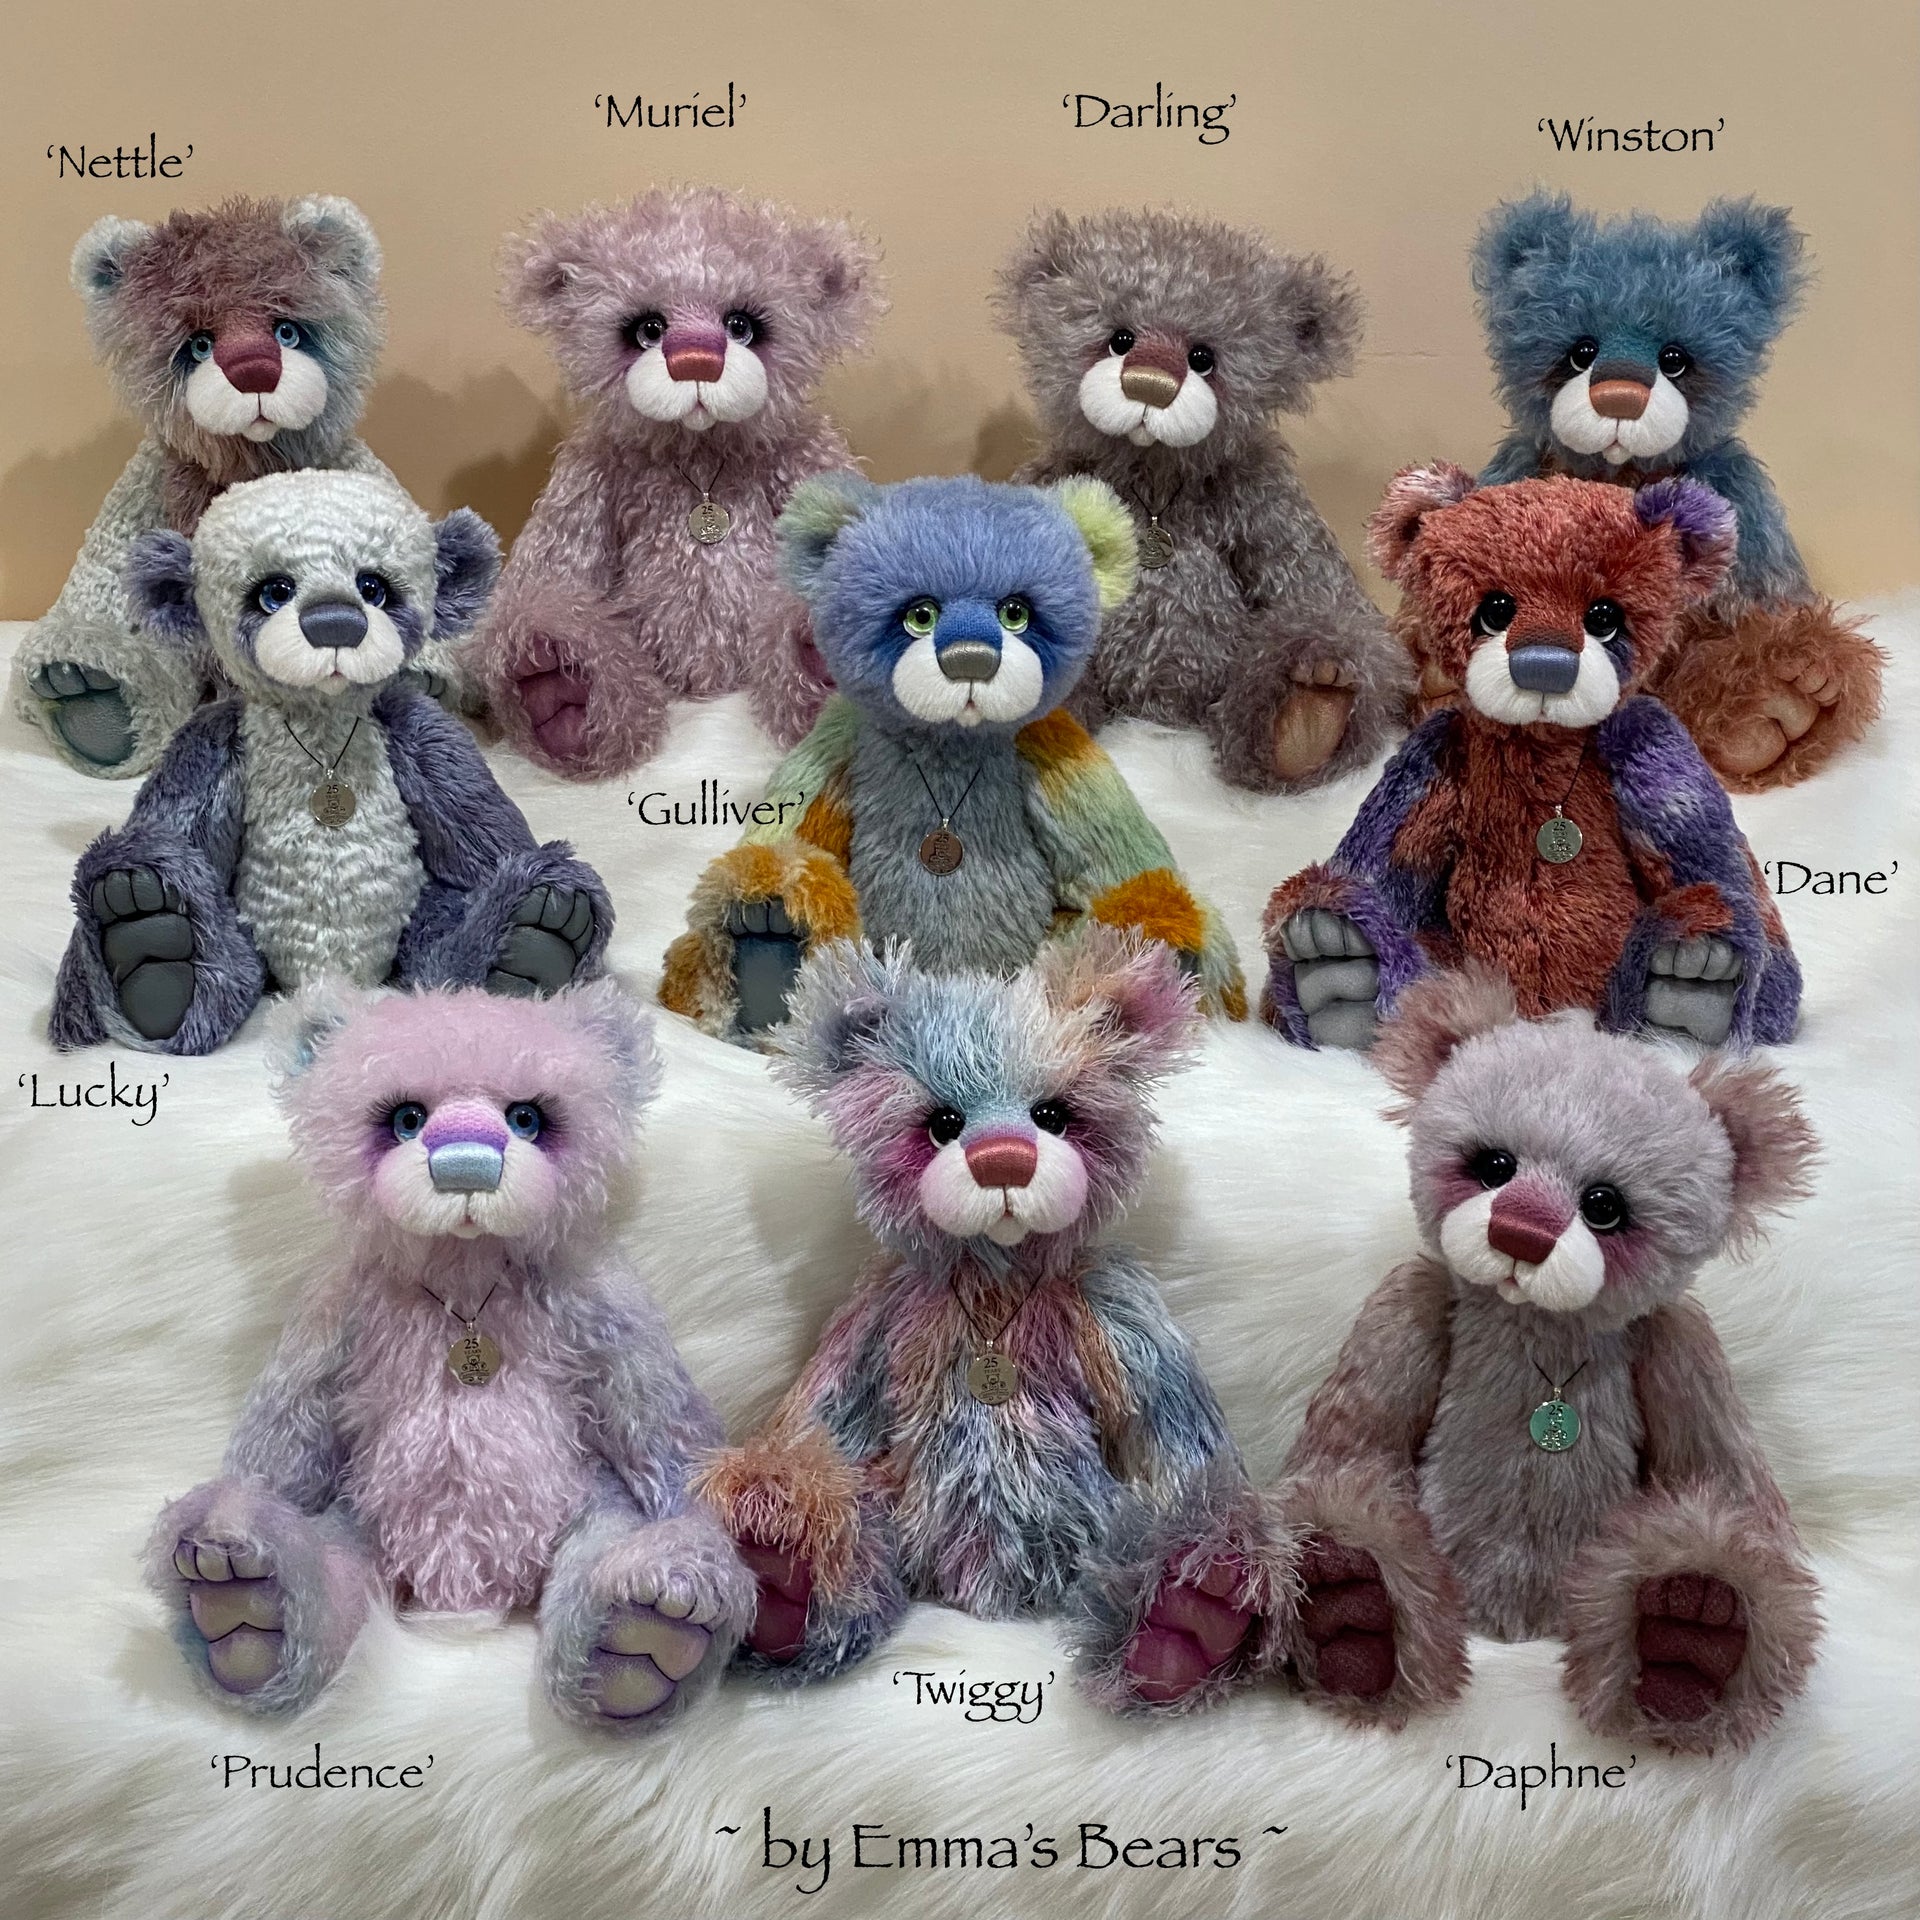 Winston - 16" SPECIAL 25th Anniversary Collection Hand-dyed mohair Artist Bear by Emmas Bears - OOAK